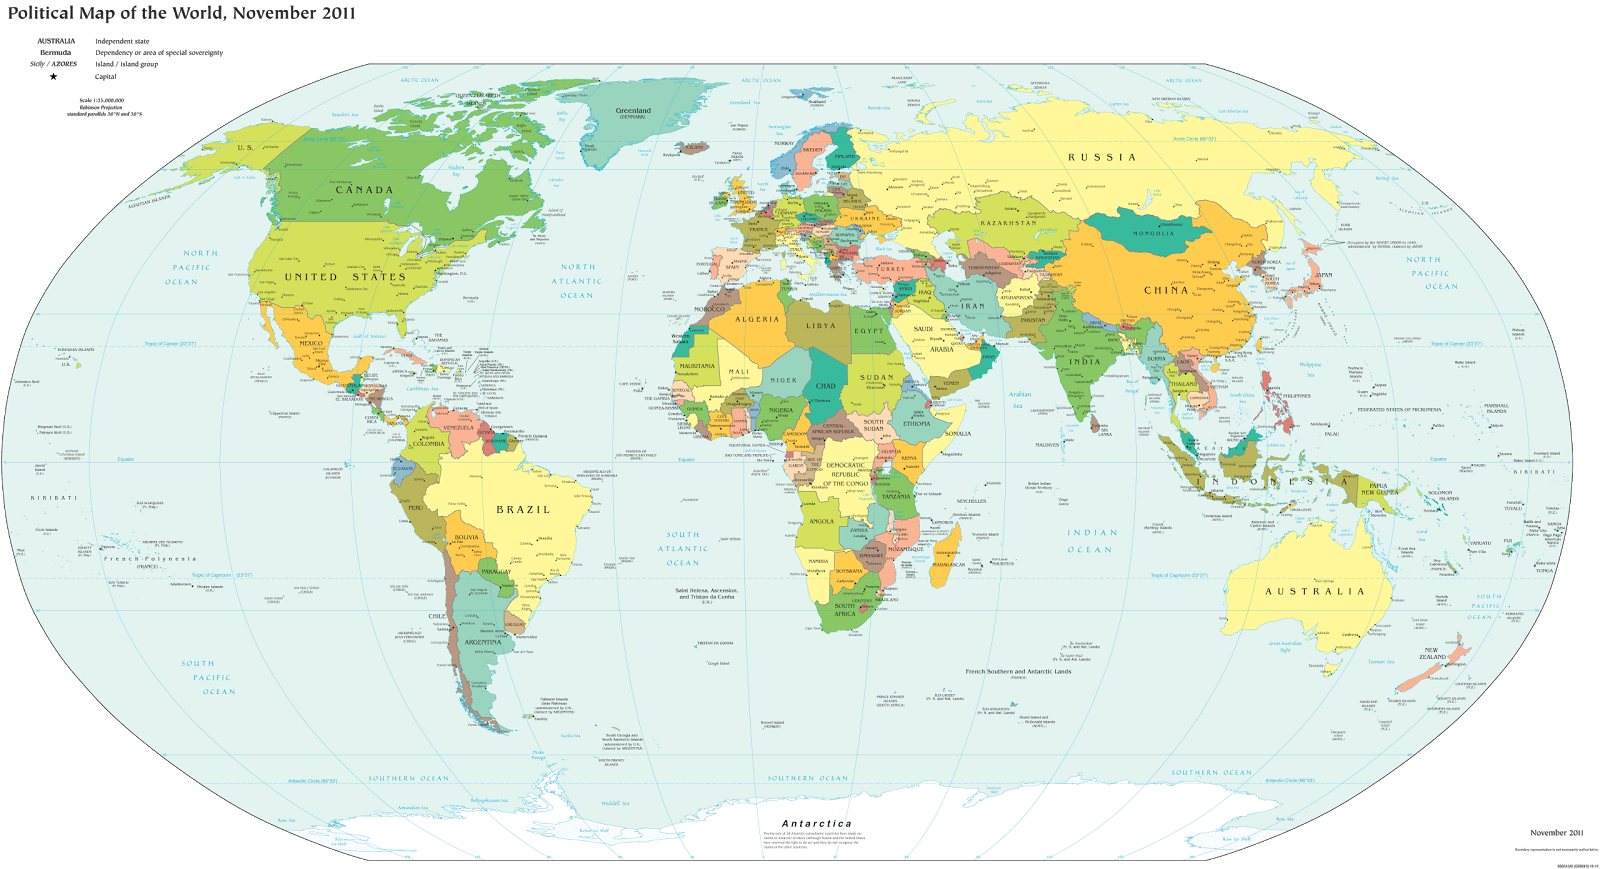 Map Of The World Hnga Map Lies Map of the world's countries according to the U.S. Central Intelligence Agency